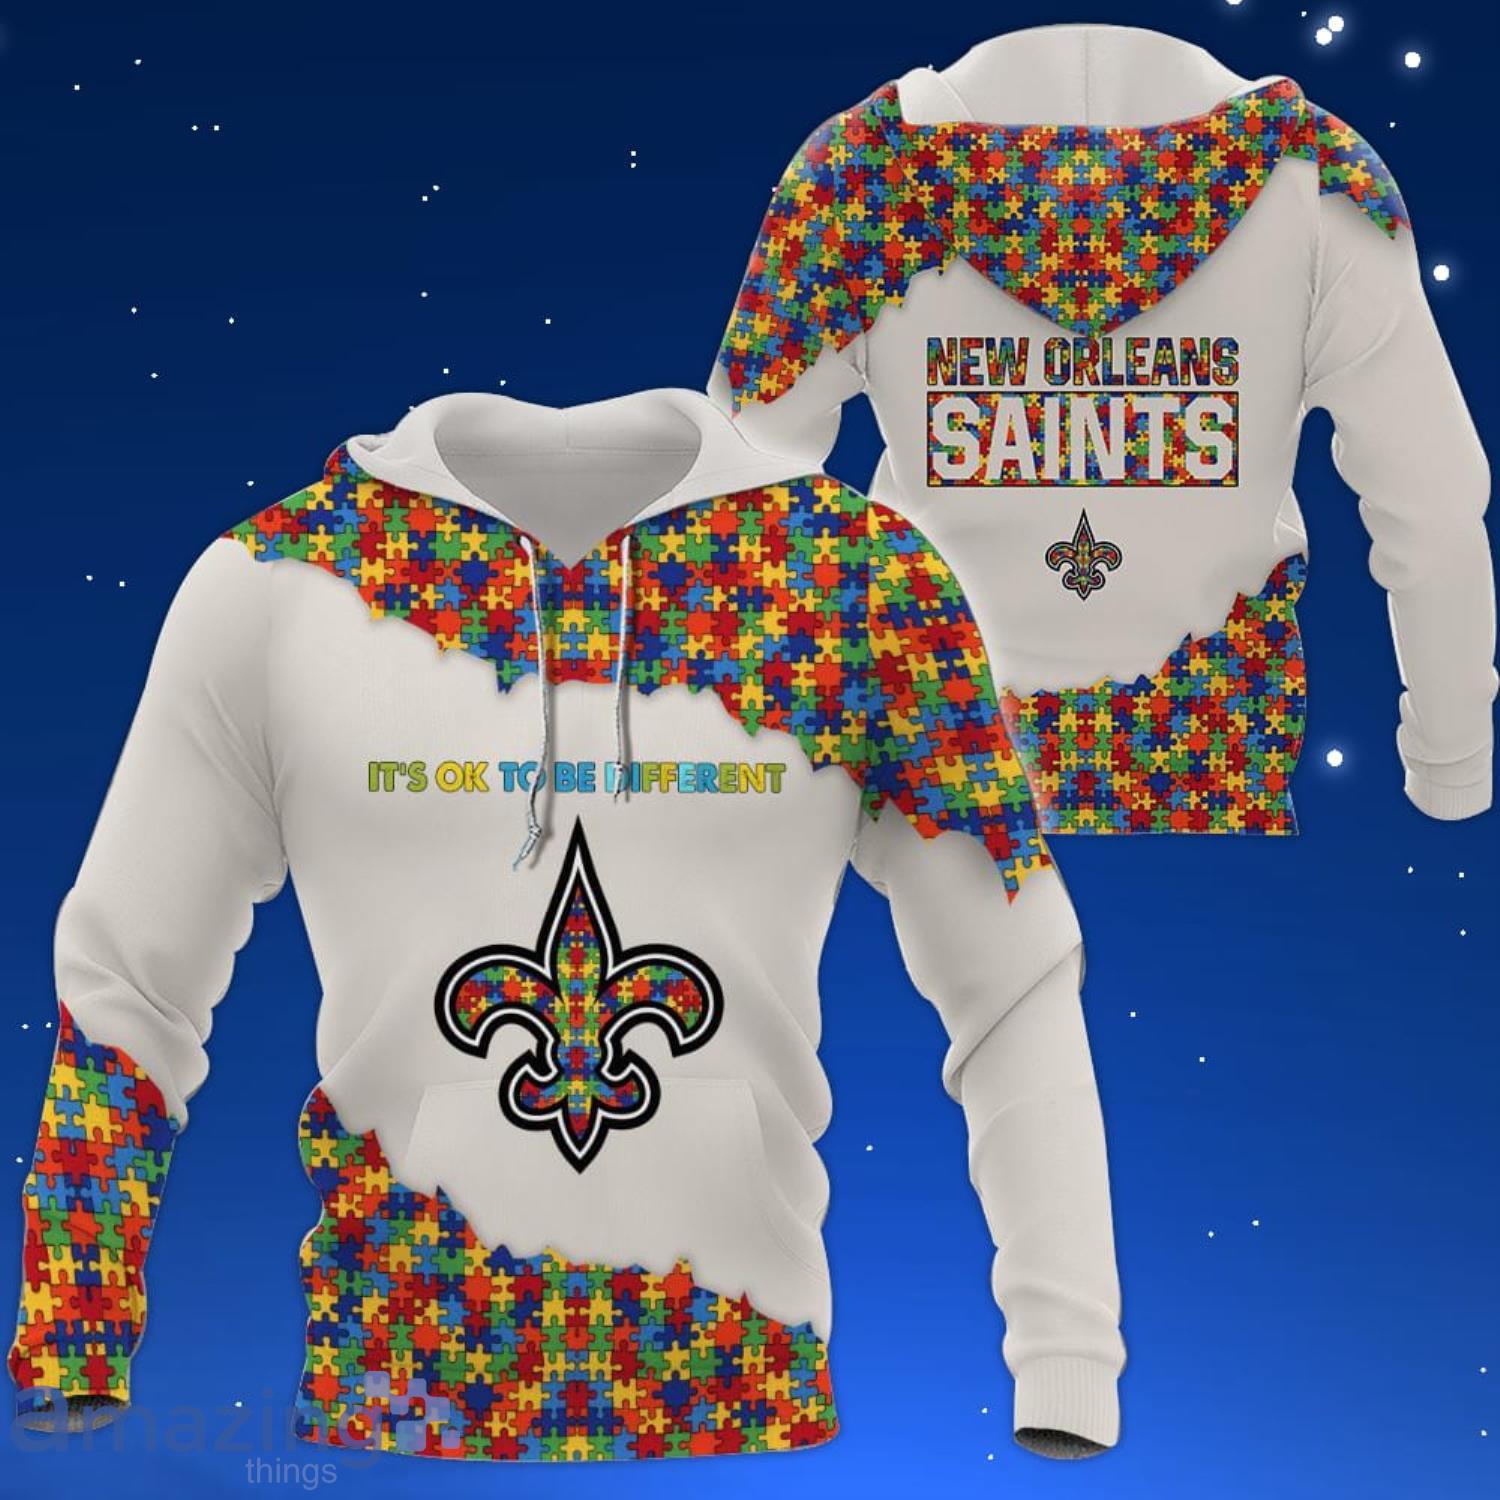 New Orleans Saints NFL Autism All Over Printed 3D Shirt For Fans